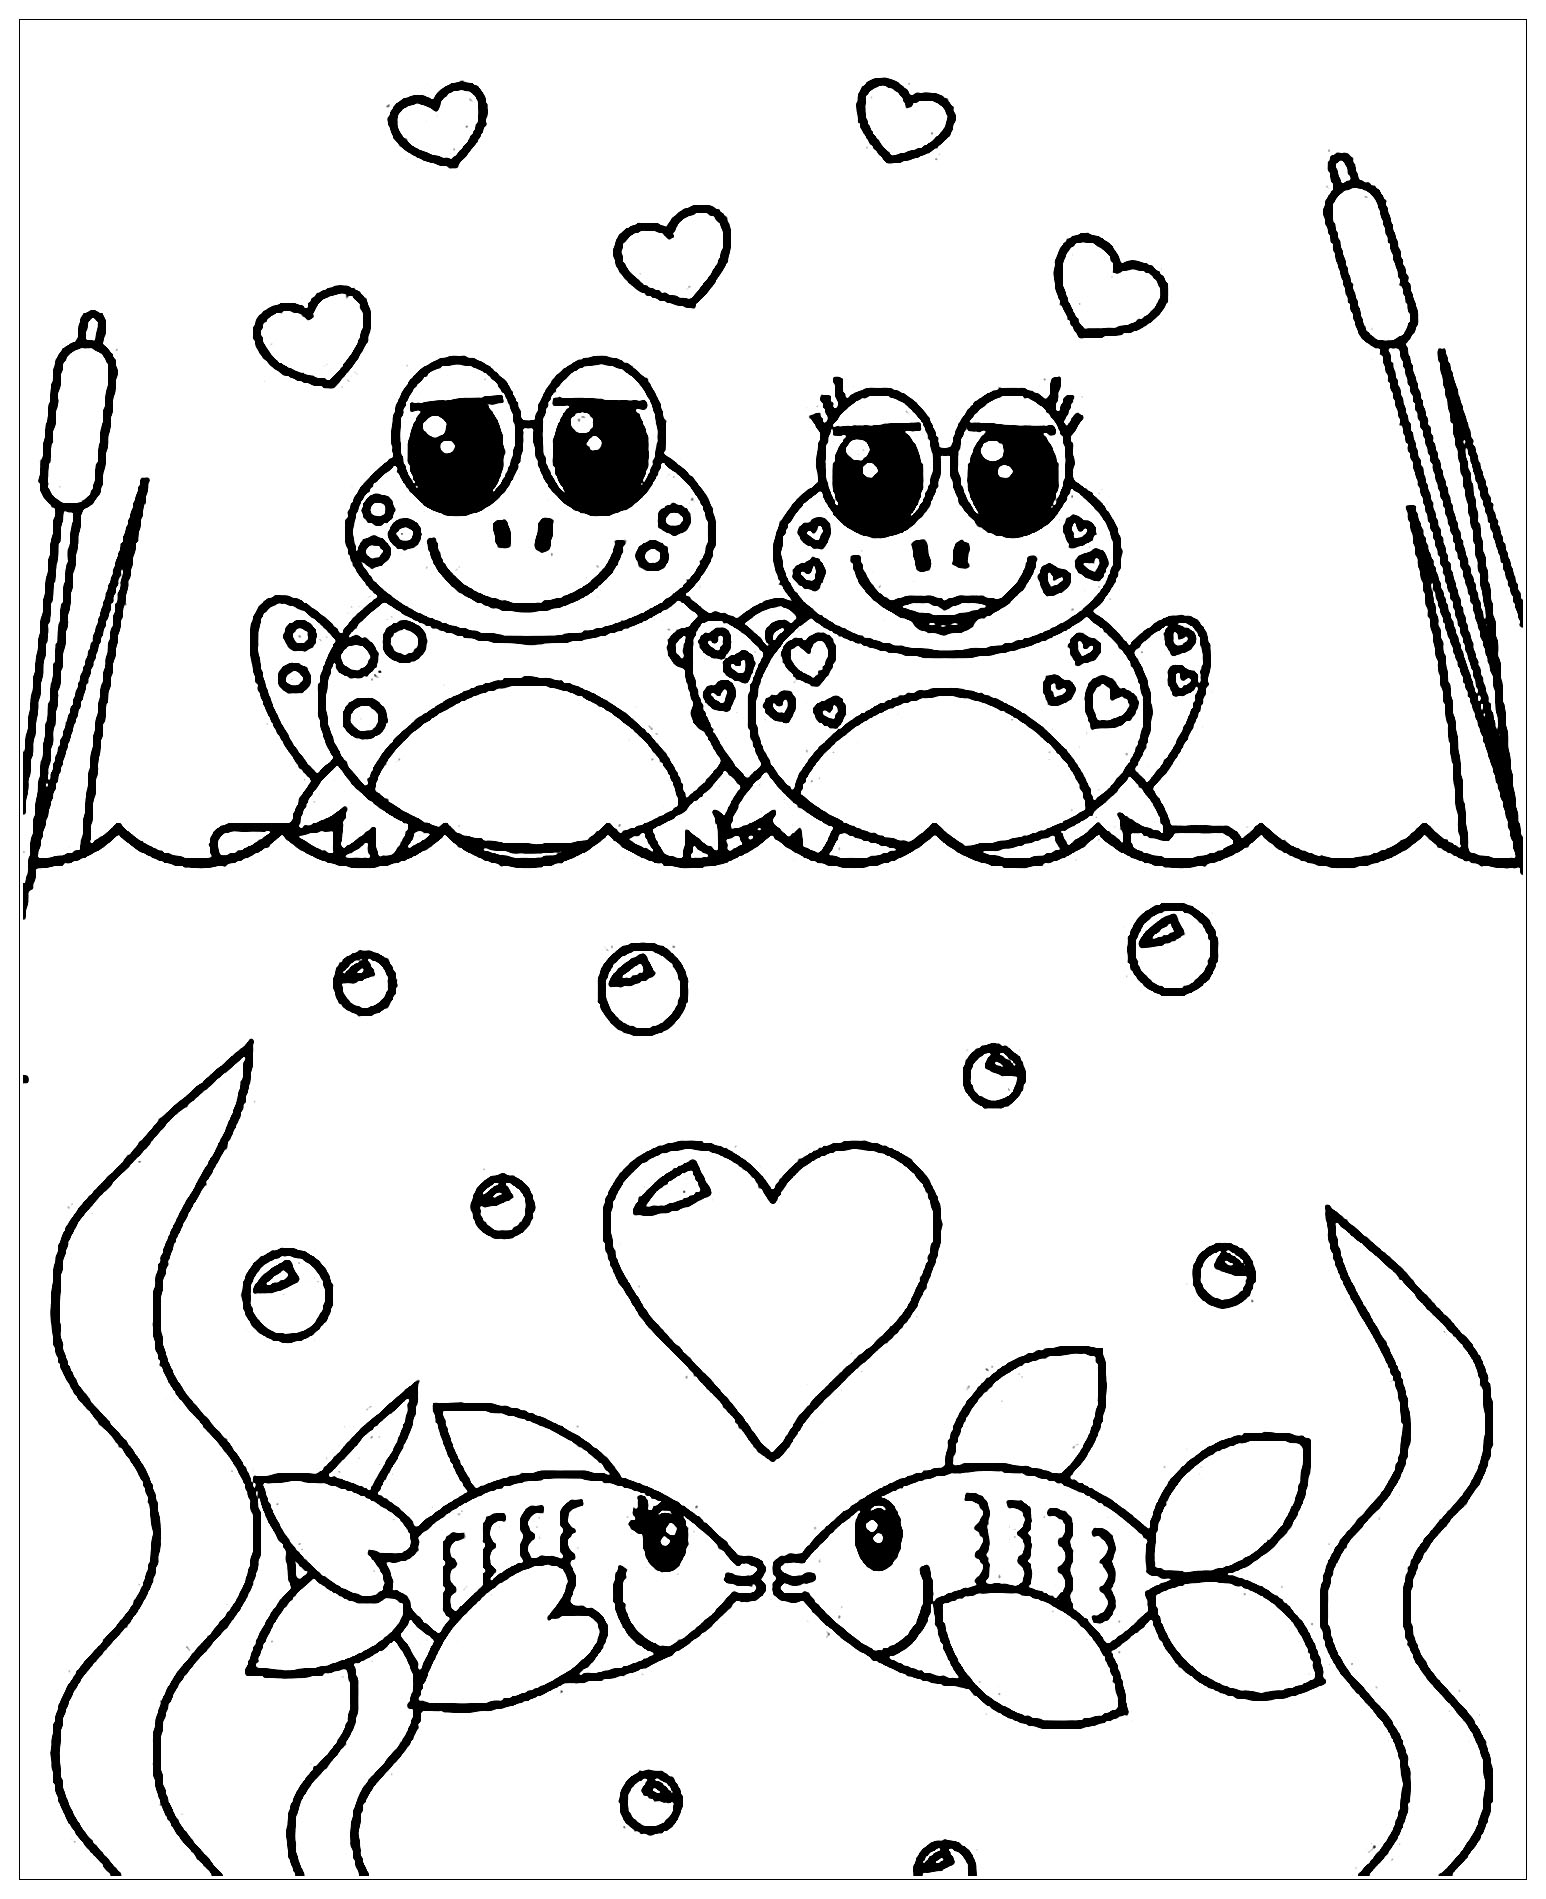 fish hooks coloring pages Elegant Fish Coloring Pages for Adults New Kids Printable Rainbow Fish